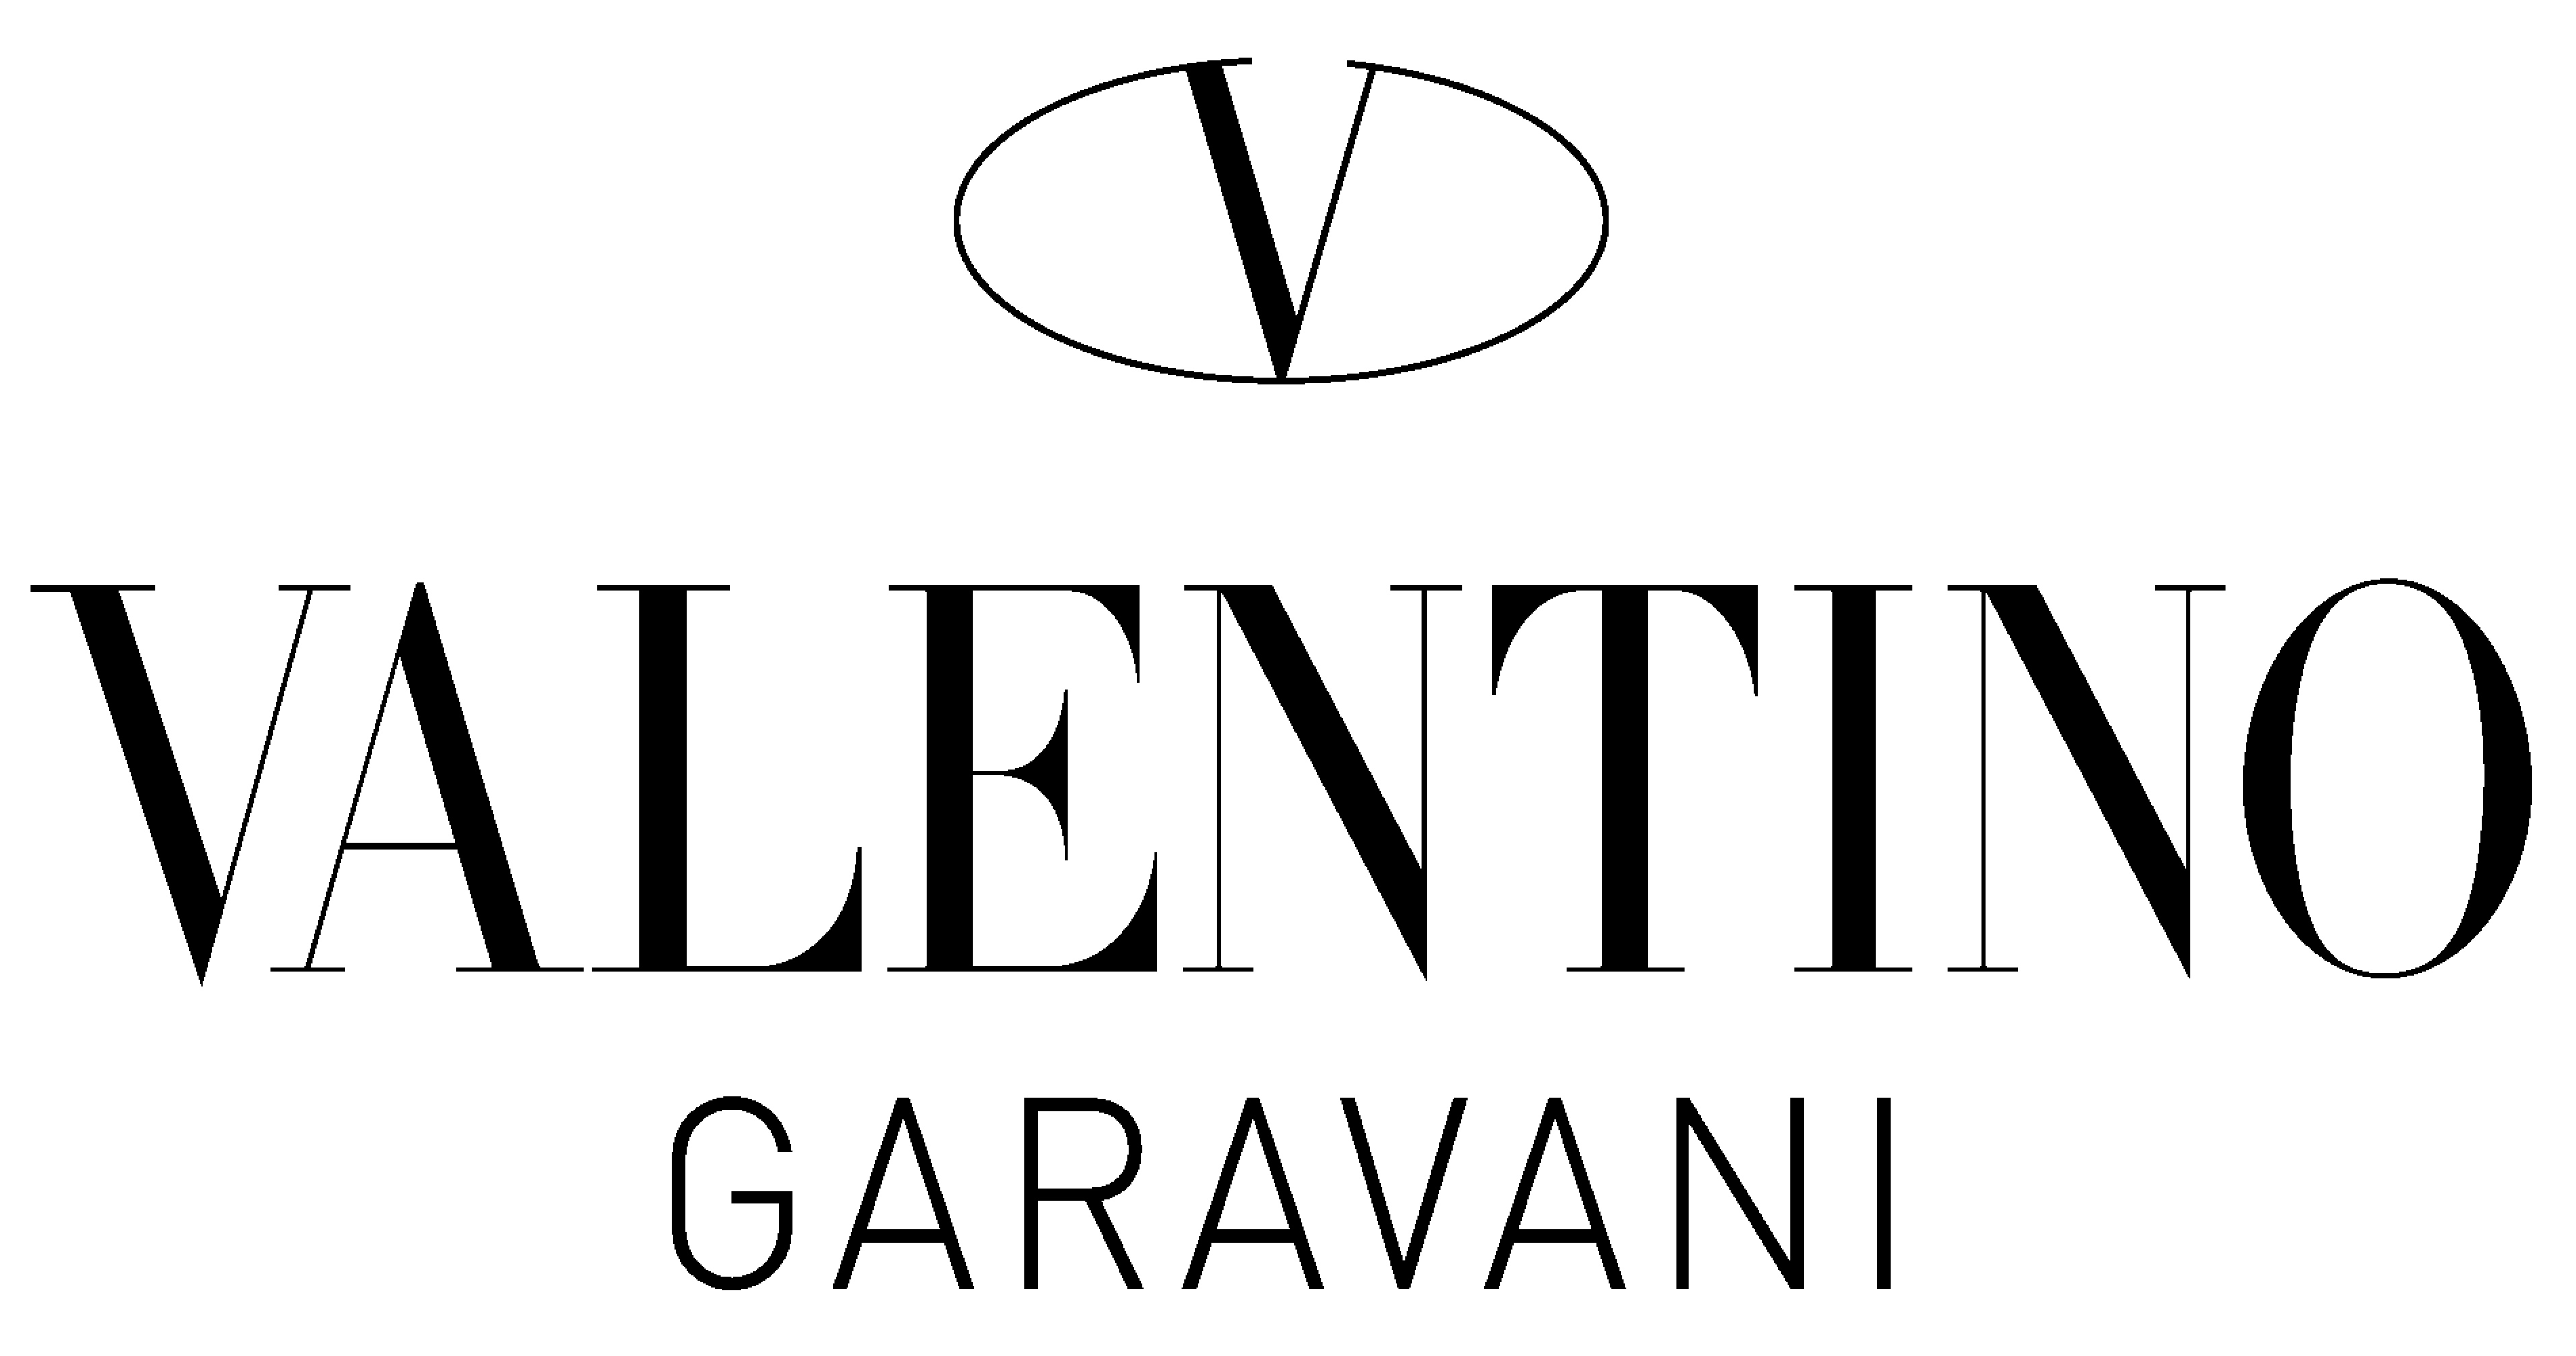 Expensive Clothing Brand Logo - Top 10 Most Expensive Clothing Brands of World